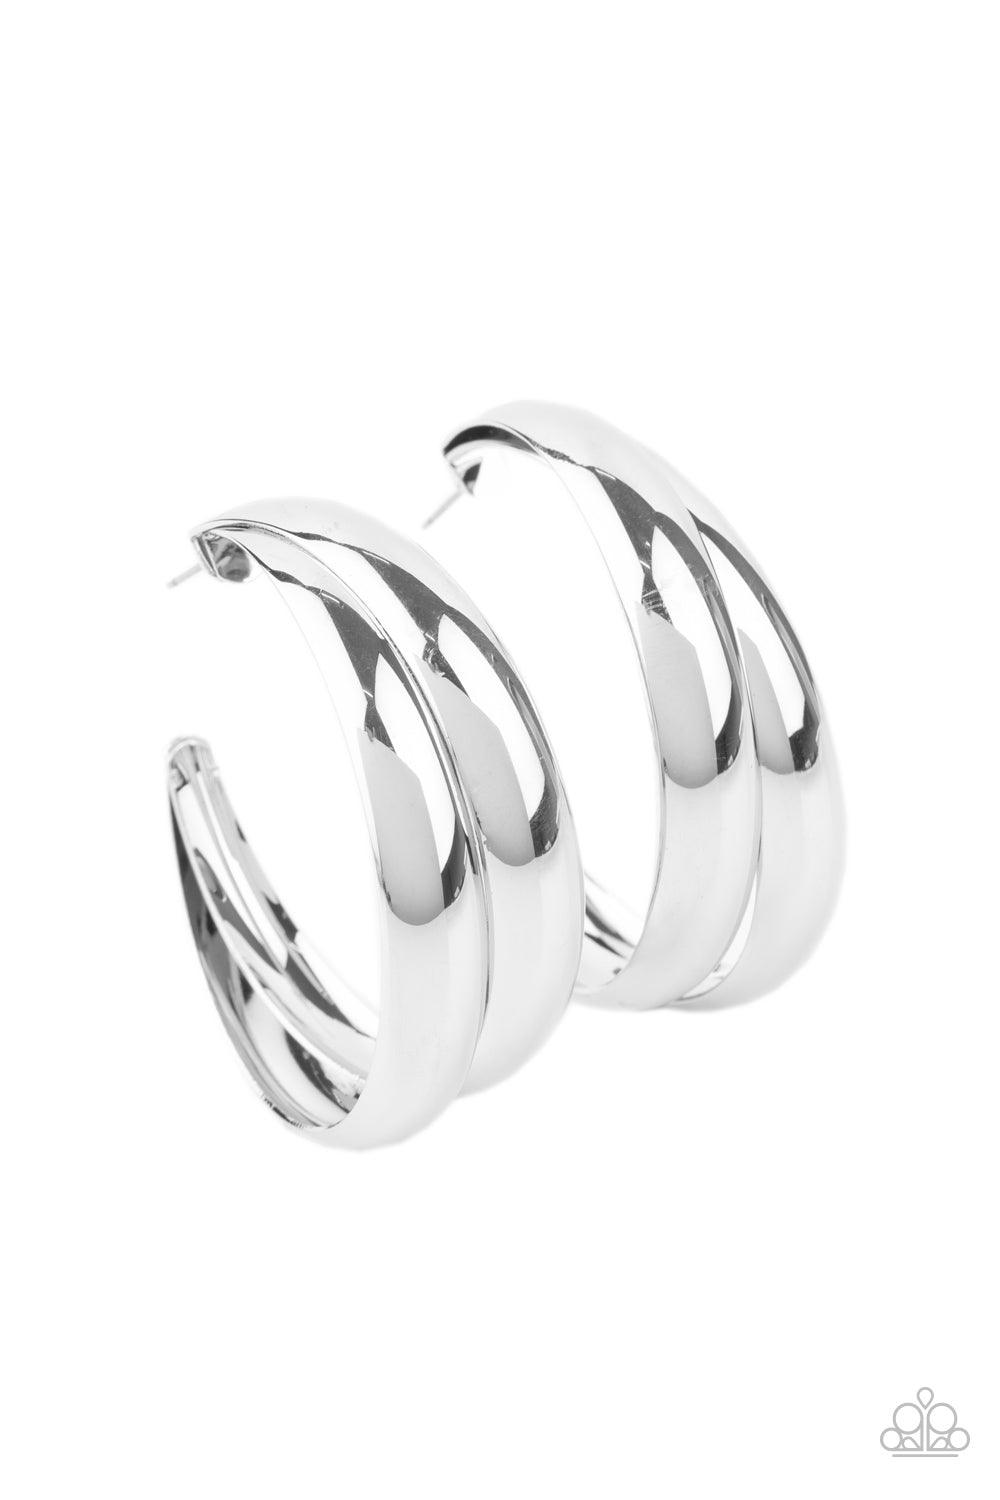 Paparazzi Accessories - Colossal Curves - Silver Earrings - Alies Bling Bar